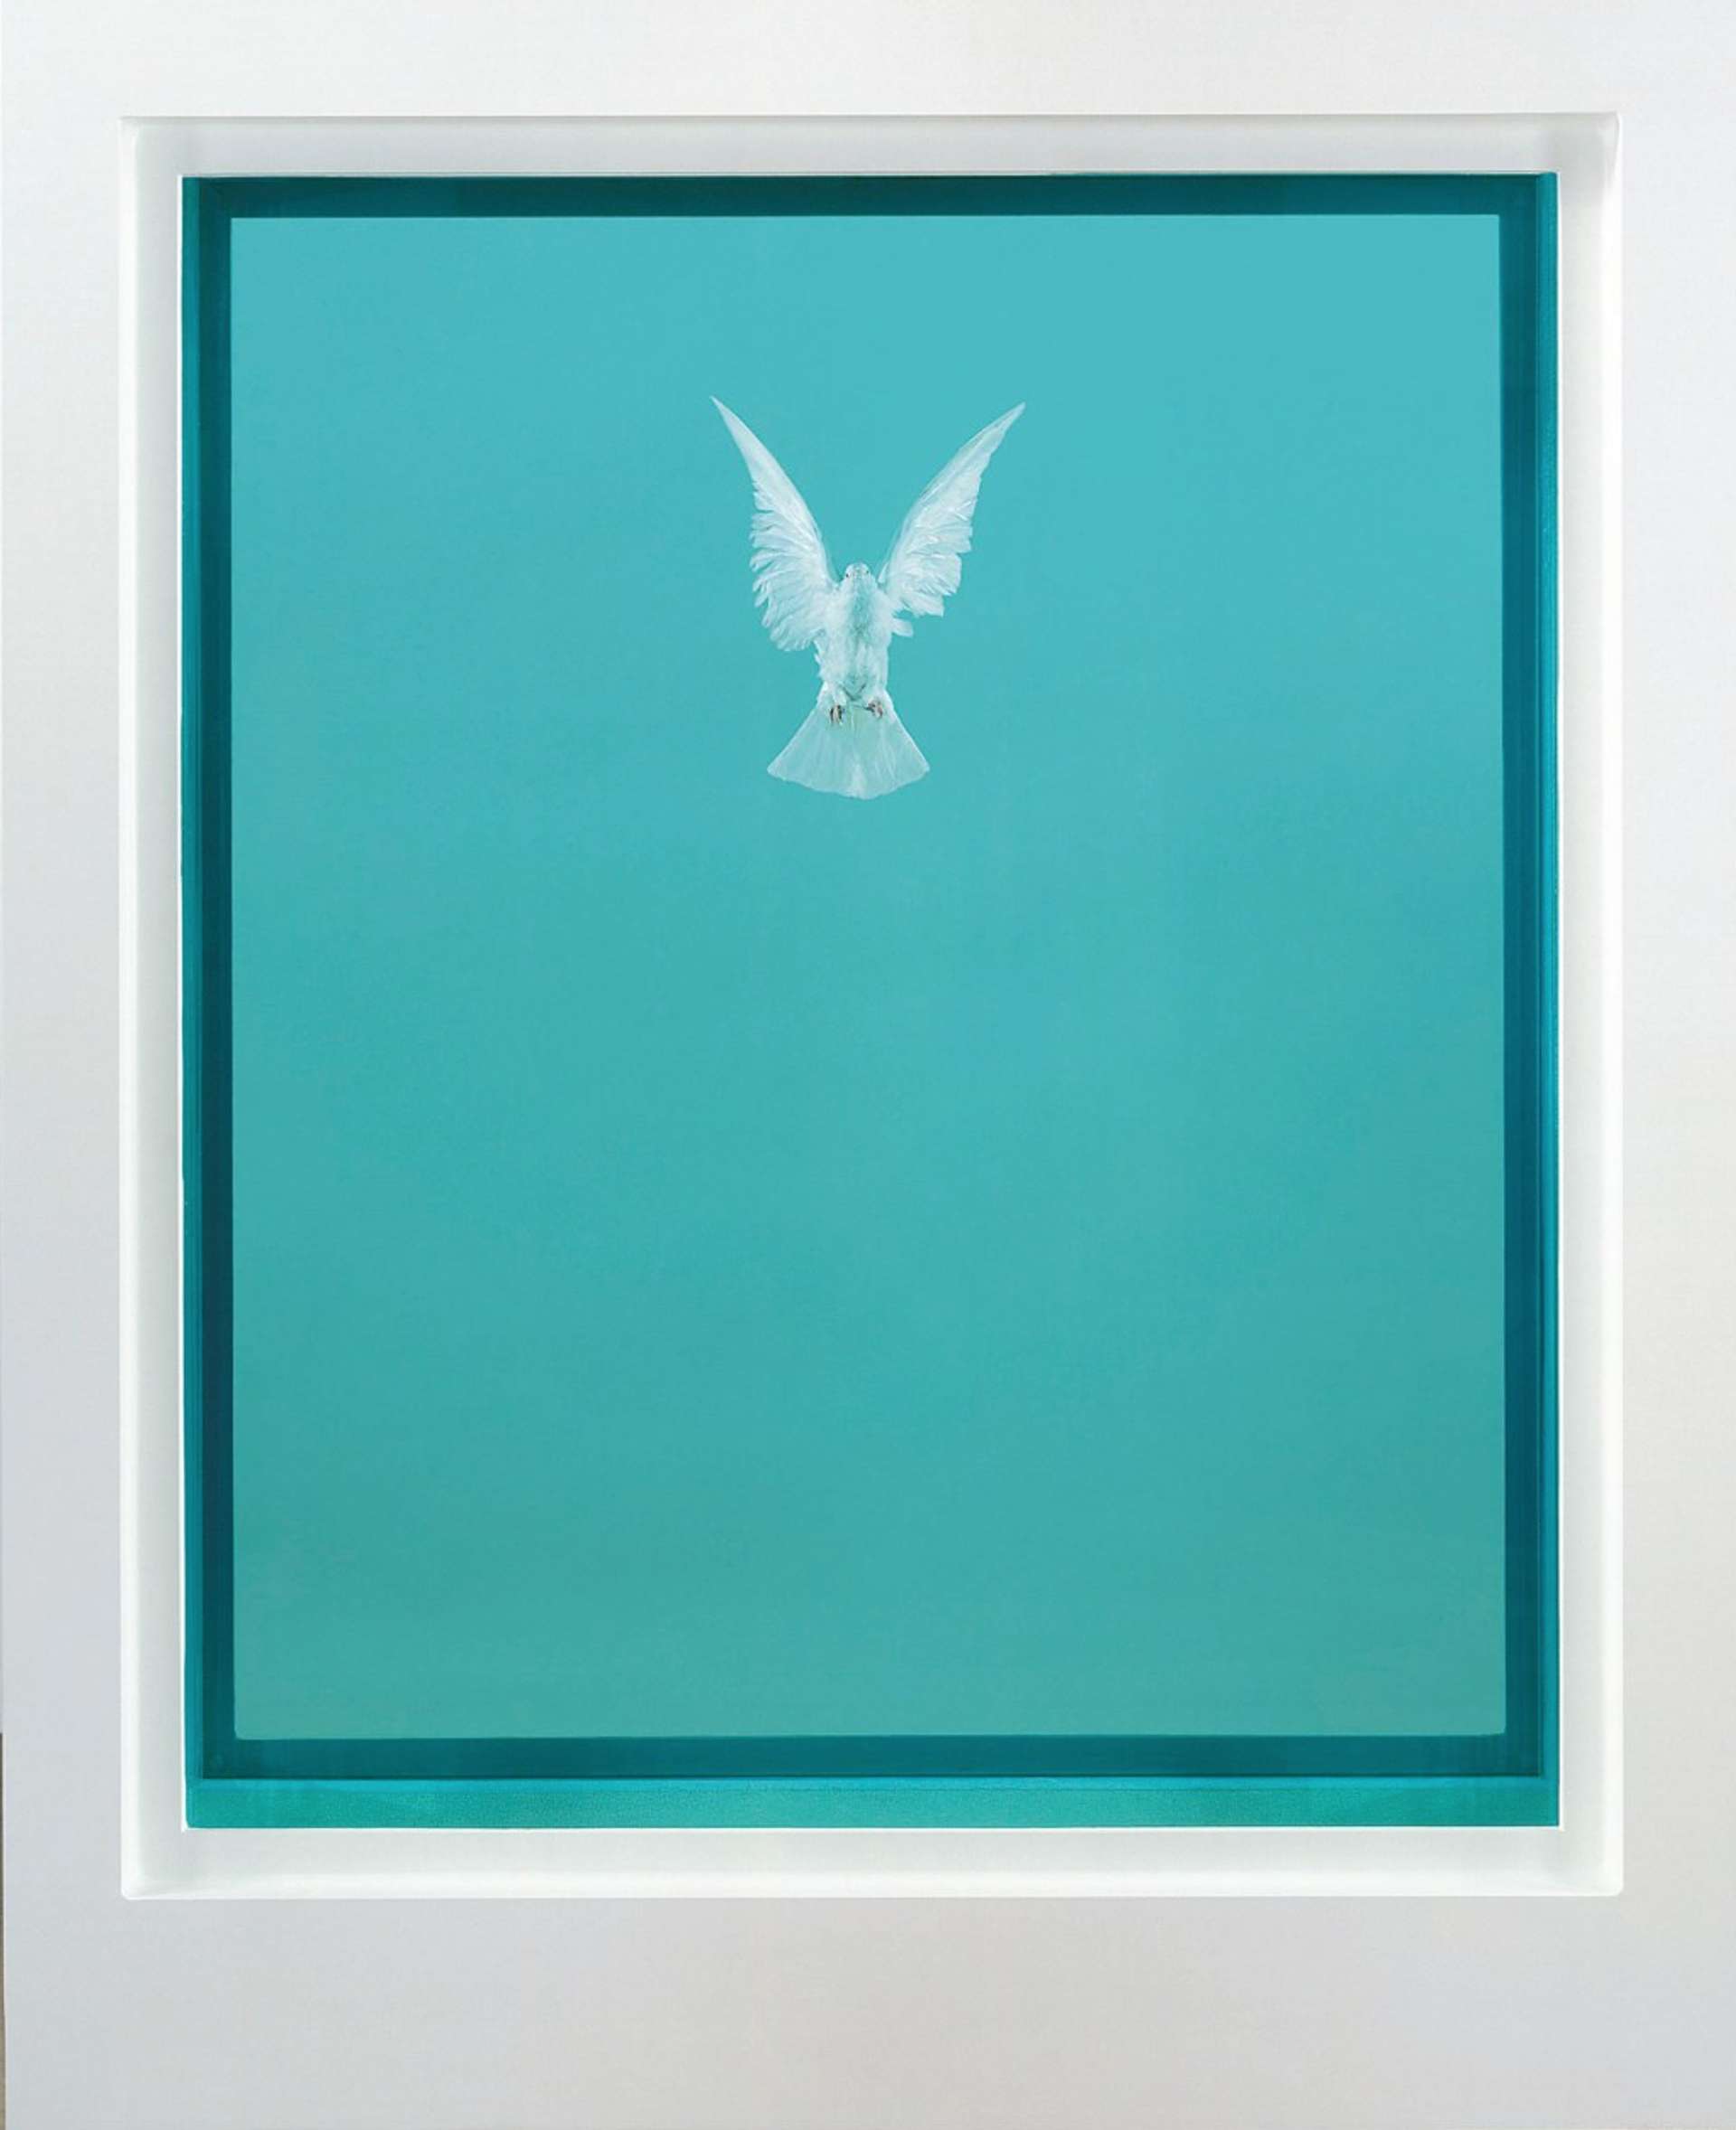 An image of the artwork The Incomplete Truth by Damien Hirst. It is composed of a dove, posed and immersed in formaldehyde.